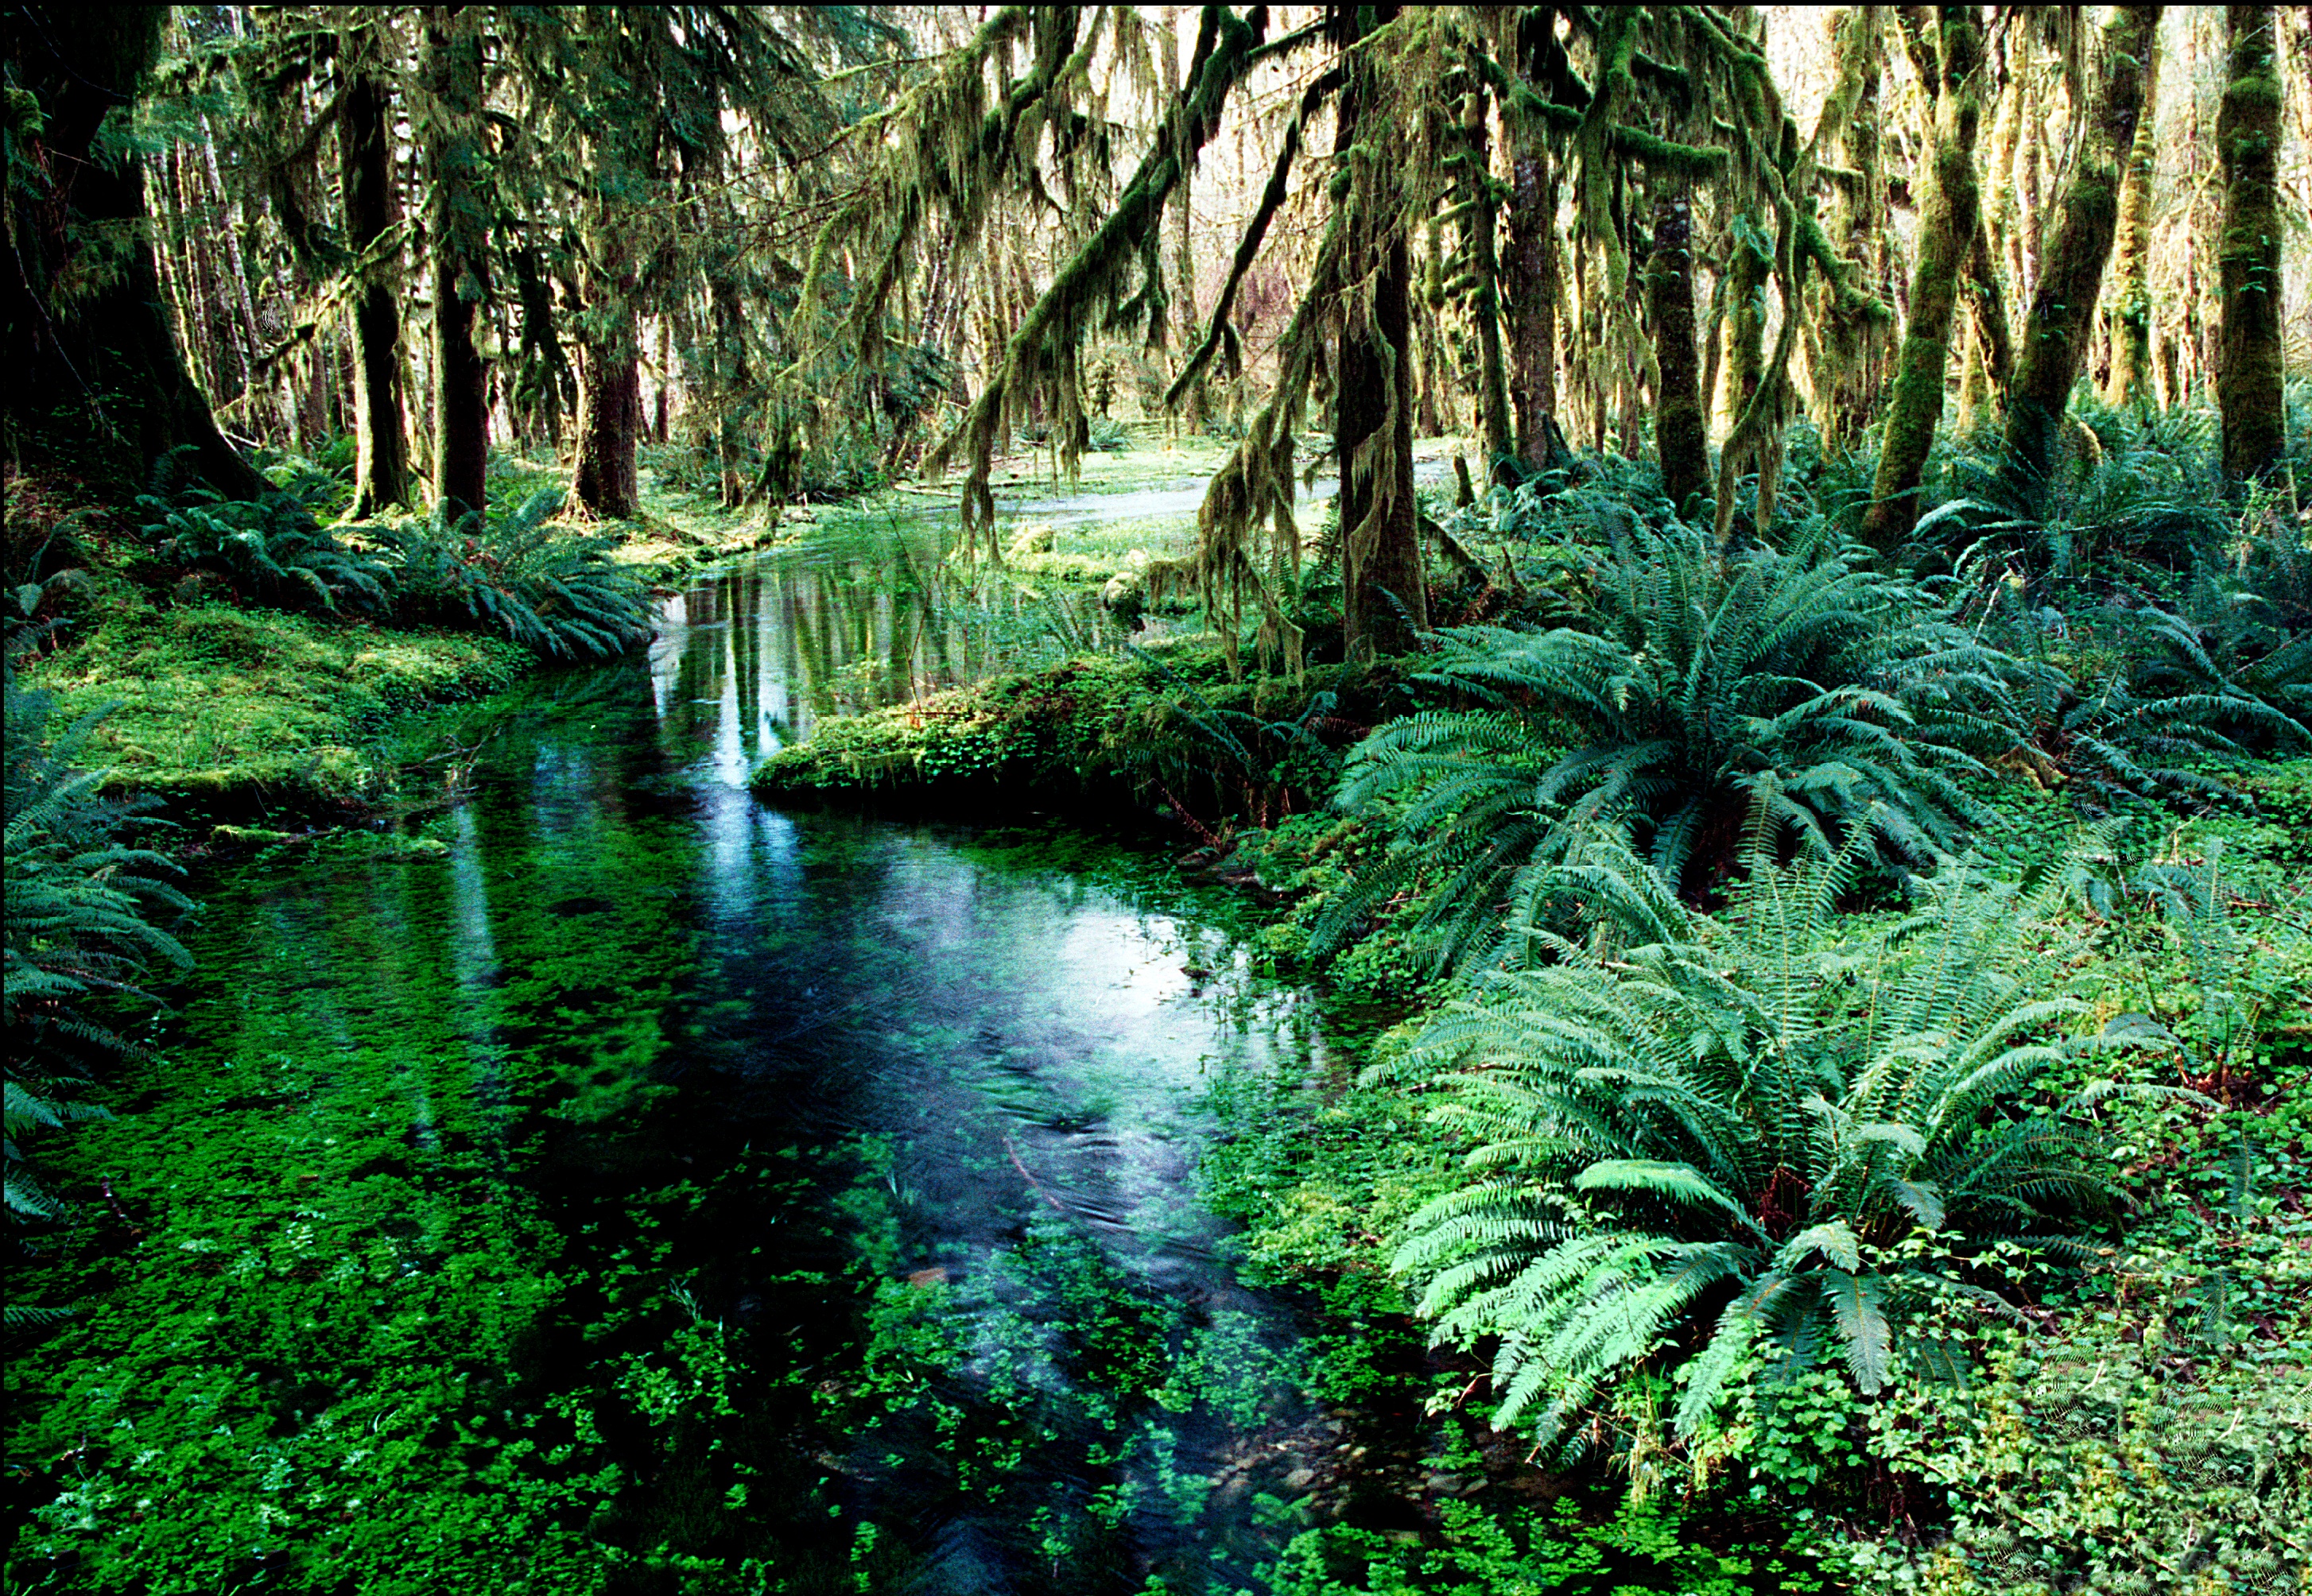 Photo of rainforest with a stream running through it.